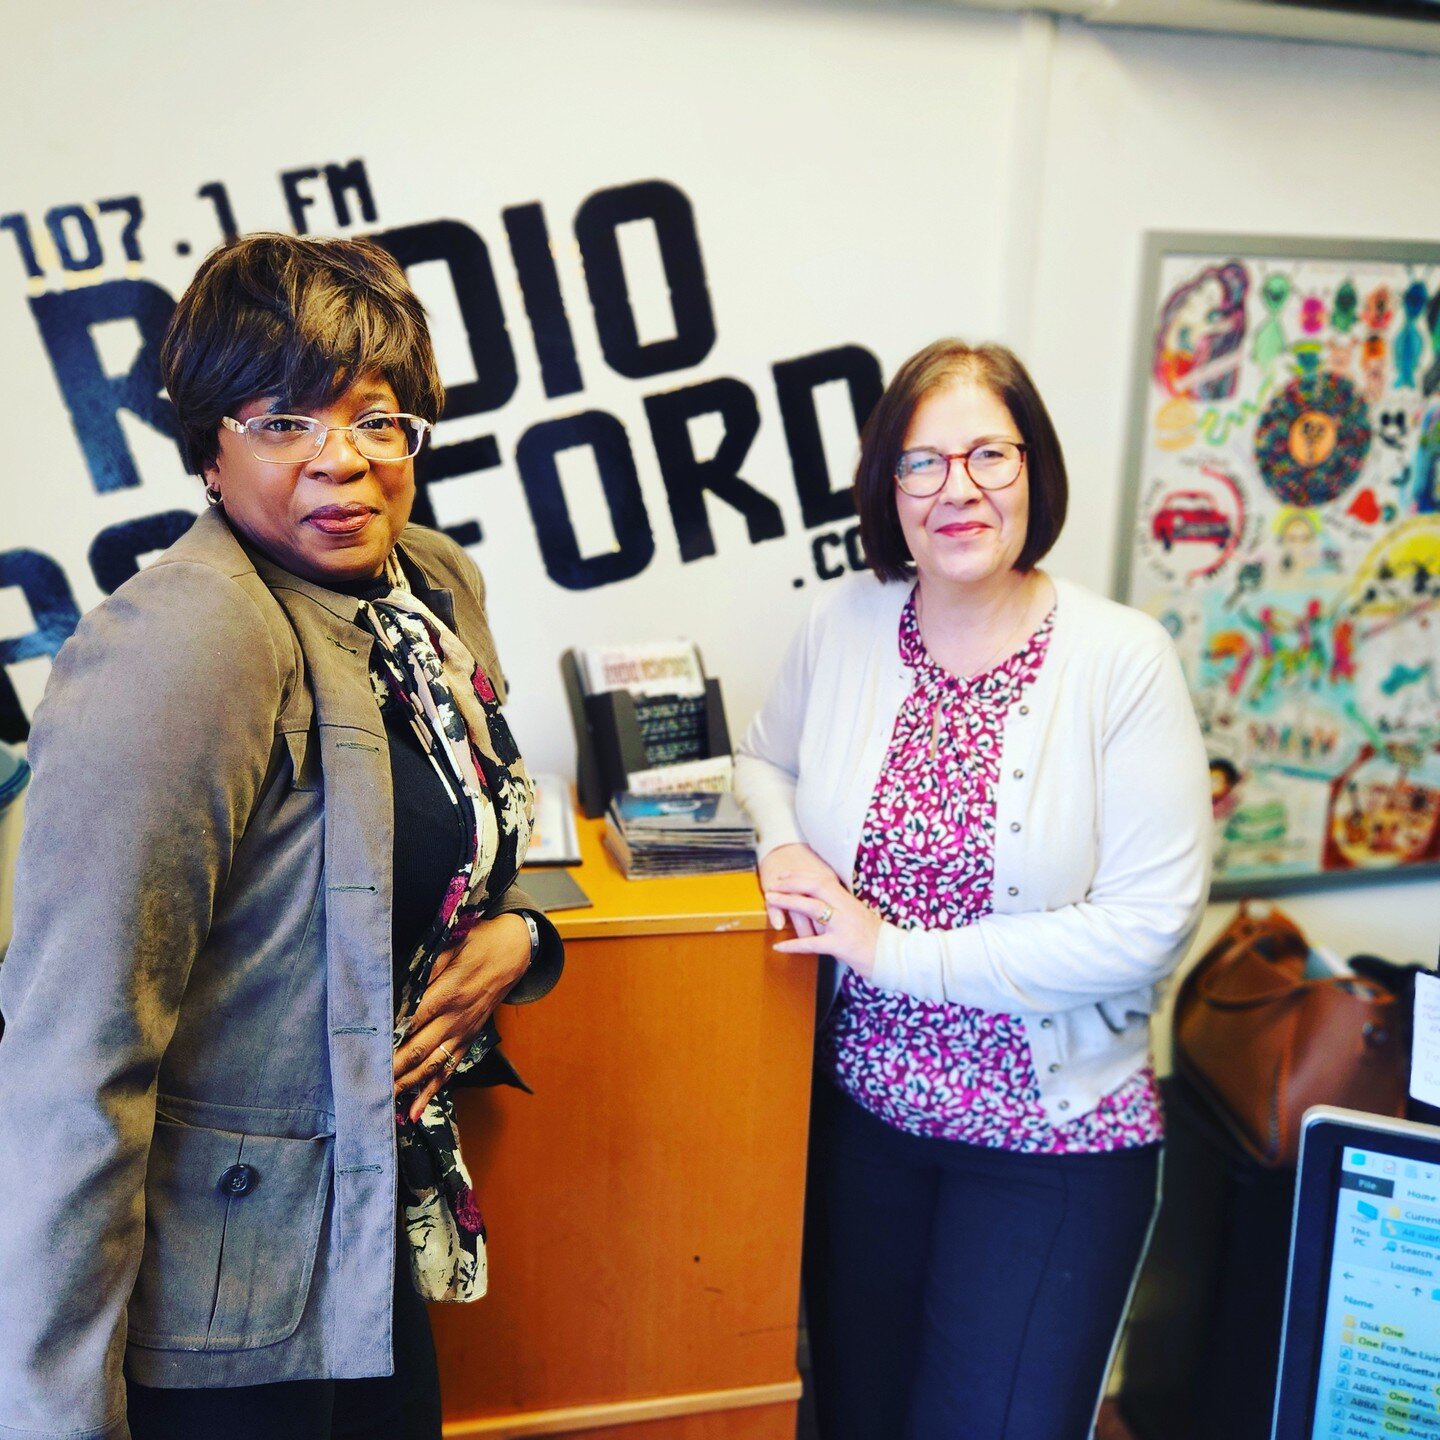 📻 Had an absolute blast at Radio Ashford https://radioashford.com/ with Martin White's Biz Connect show! 😊 Got to showcase the amazing Lisa Young and Herbiz, along with introducing WeClick CIC and Incredible Thinks. Despite battling giggles and a m